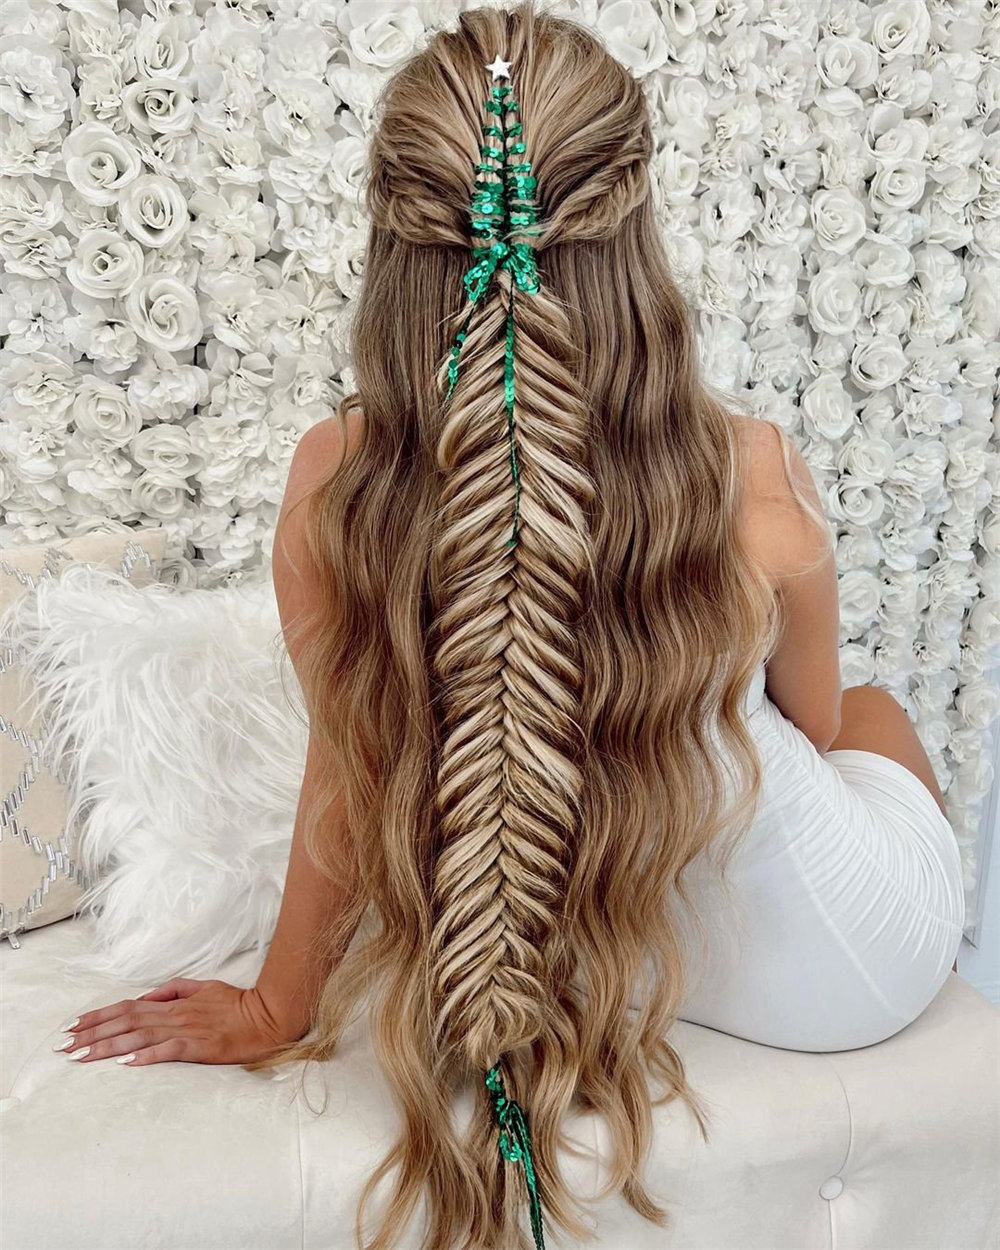 30 Christmas Hairstyle Ideas to Inspire You Holiday Season - Flymeso Blog